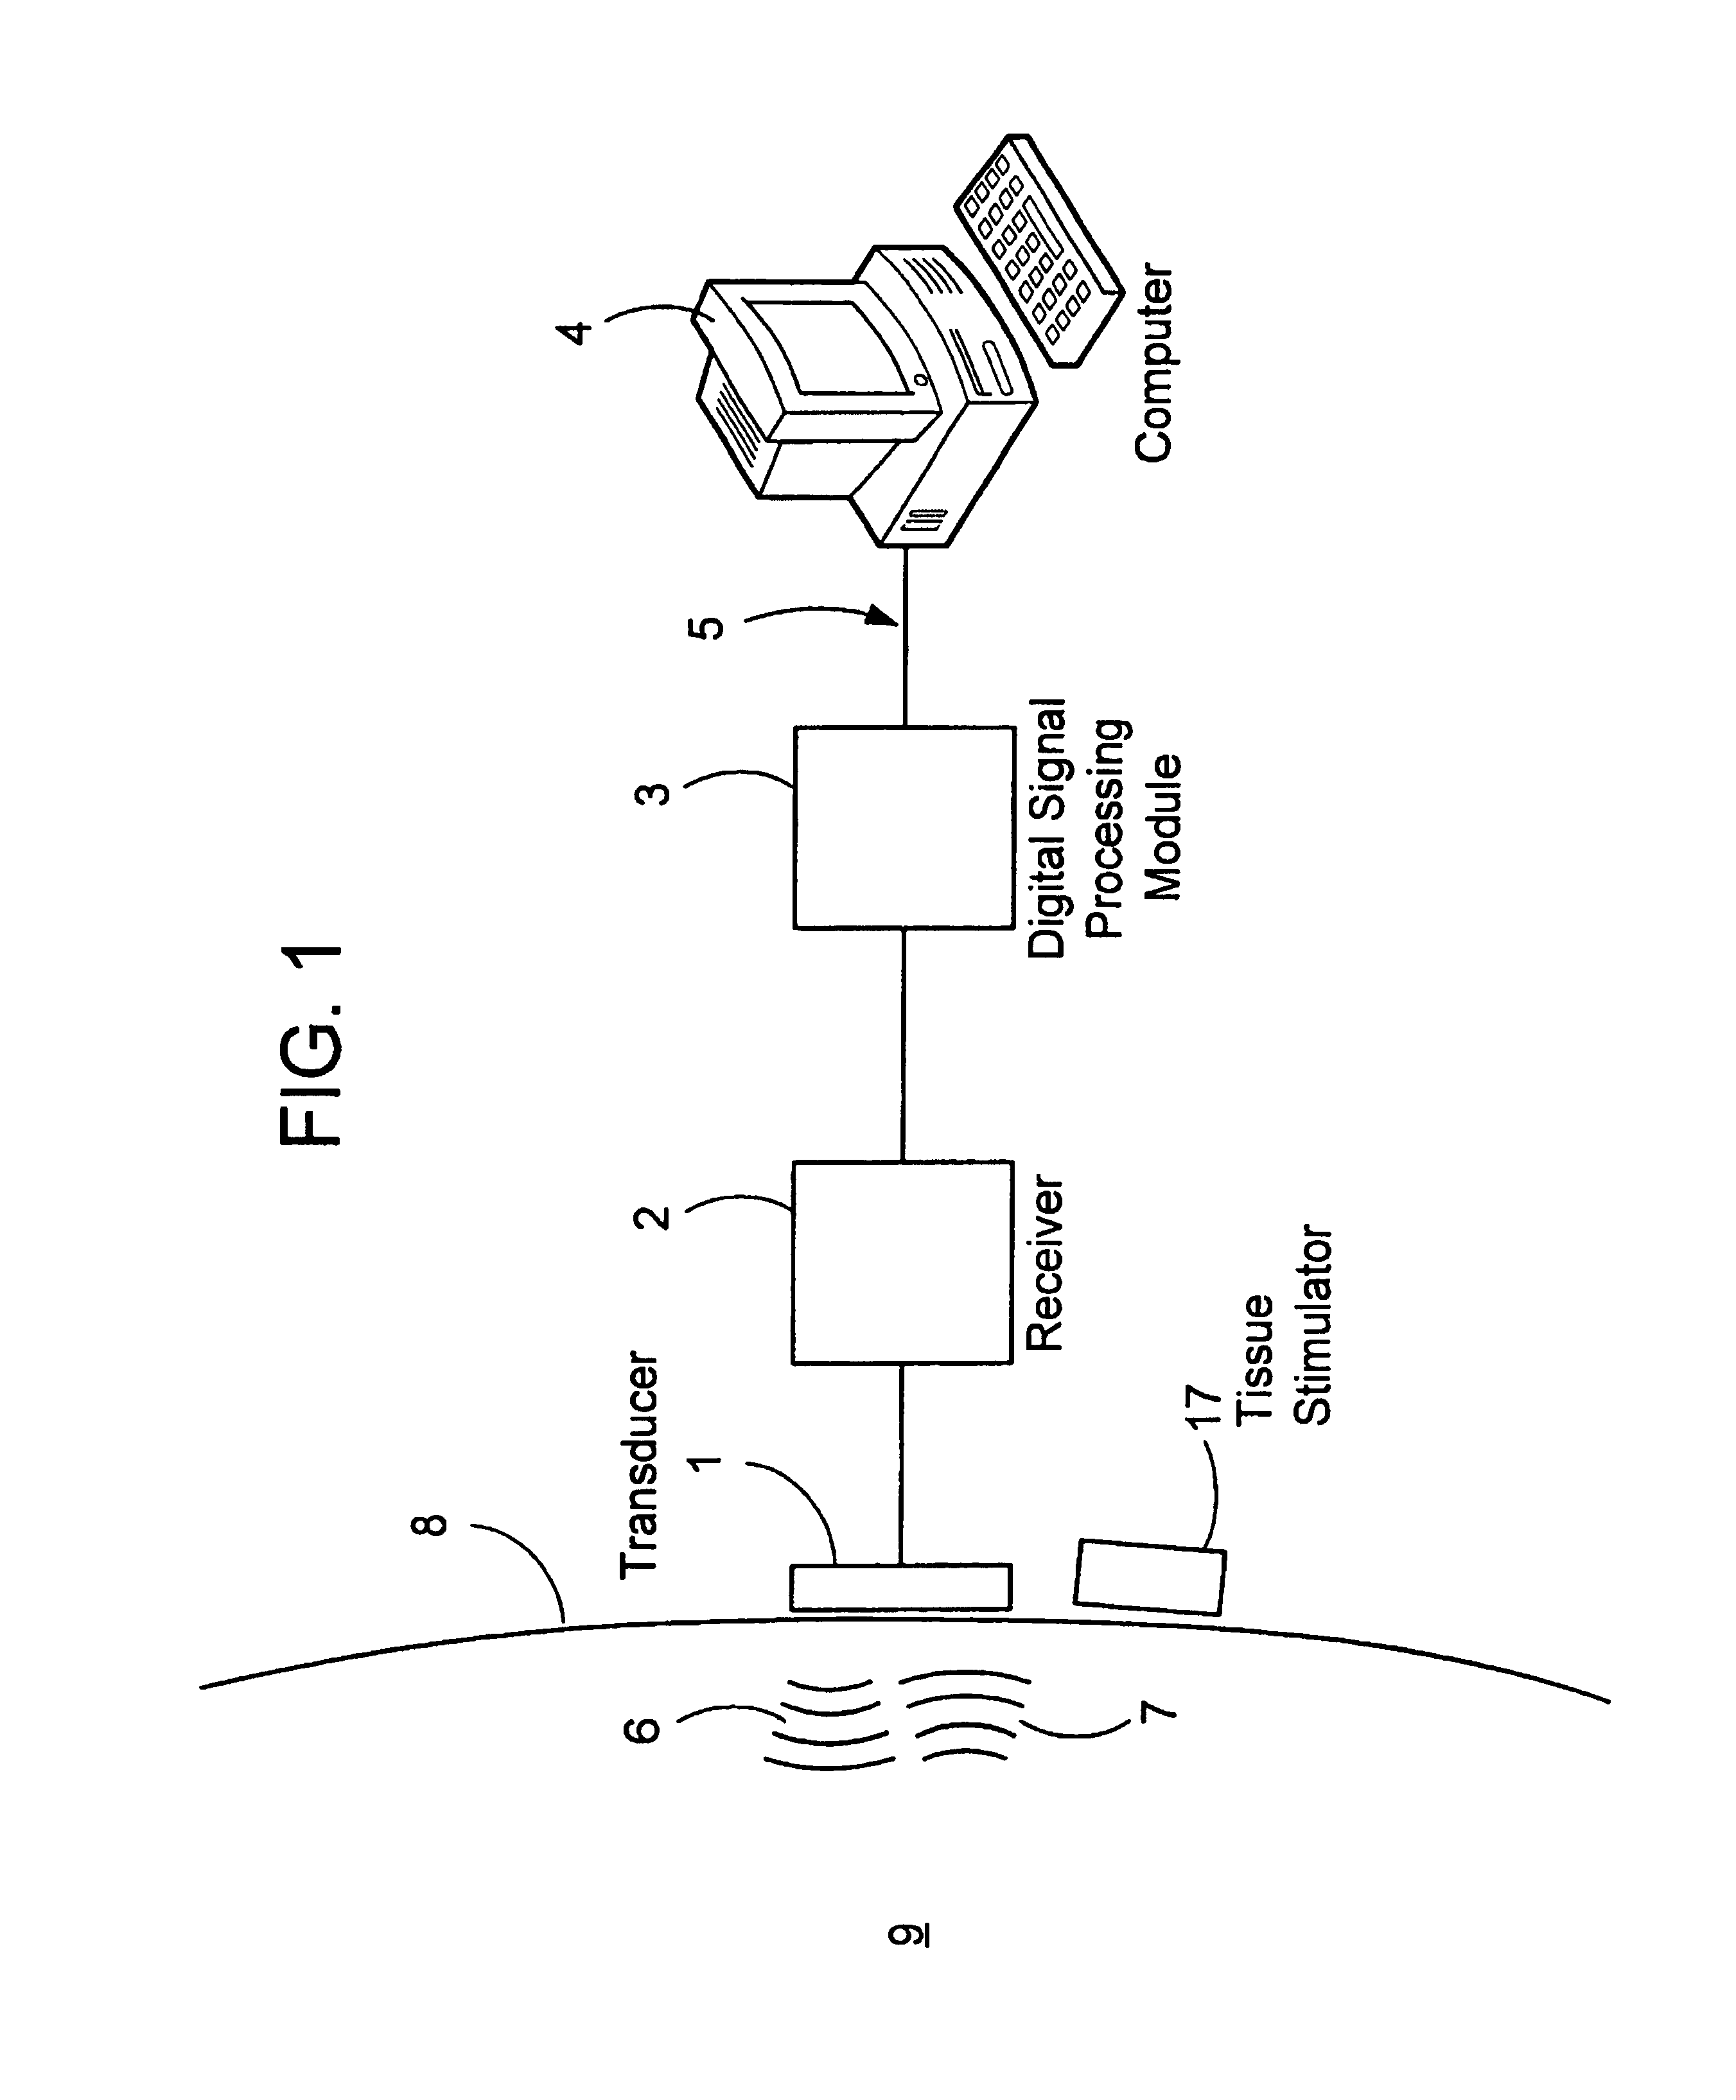 Method and apparatus for sensing body gesture, posture and movement